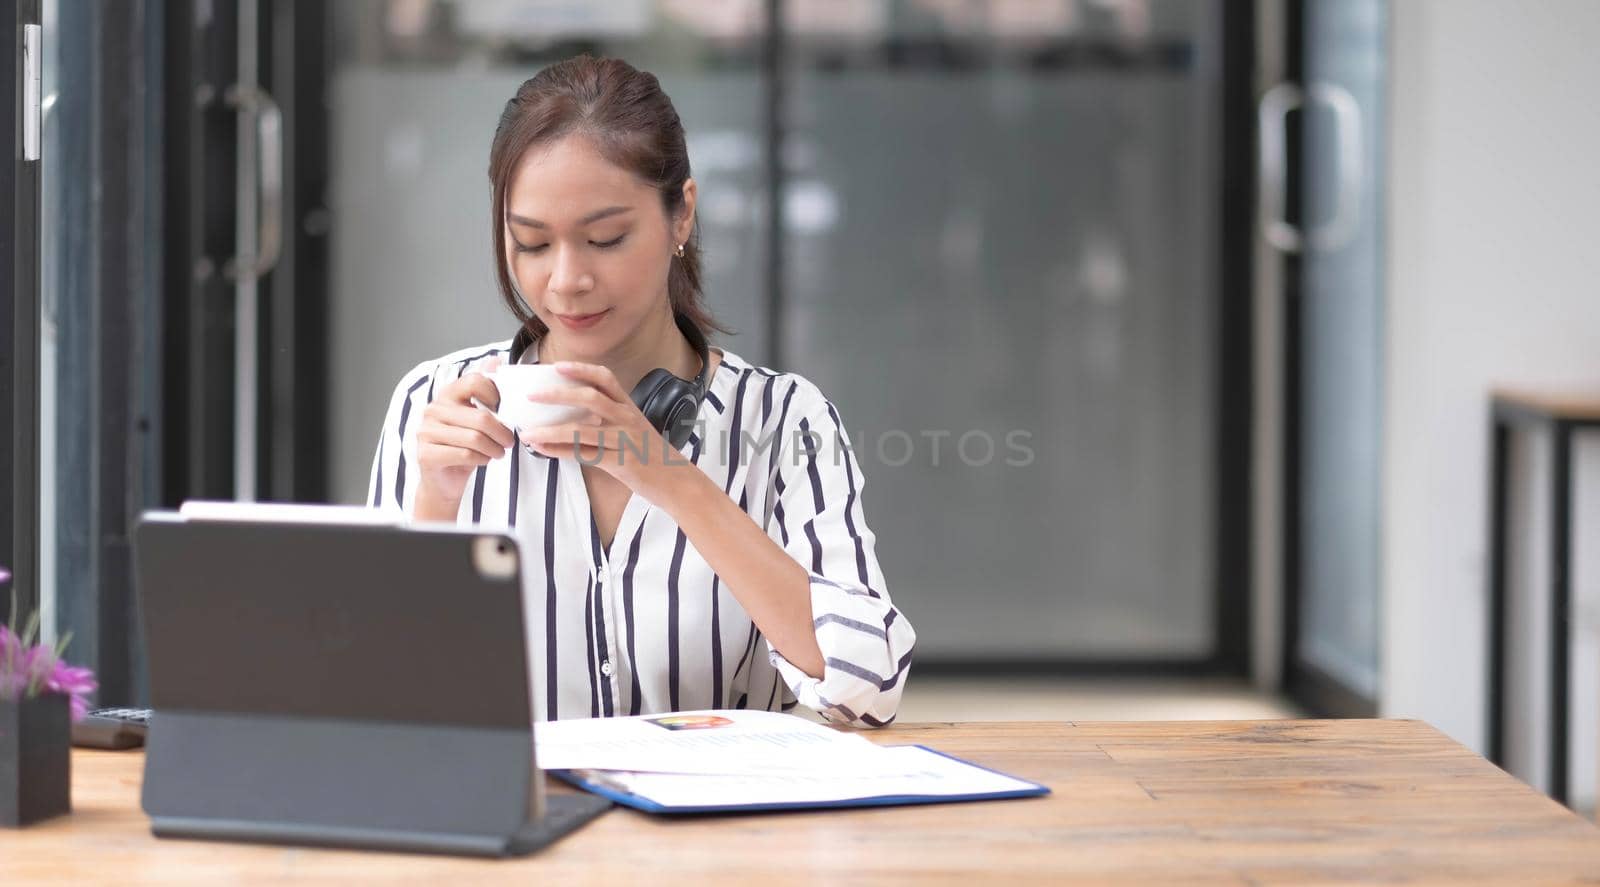 Image of a young woman smiling through a laptop's web camera while holding a cup of coffee in the kitchen at home..